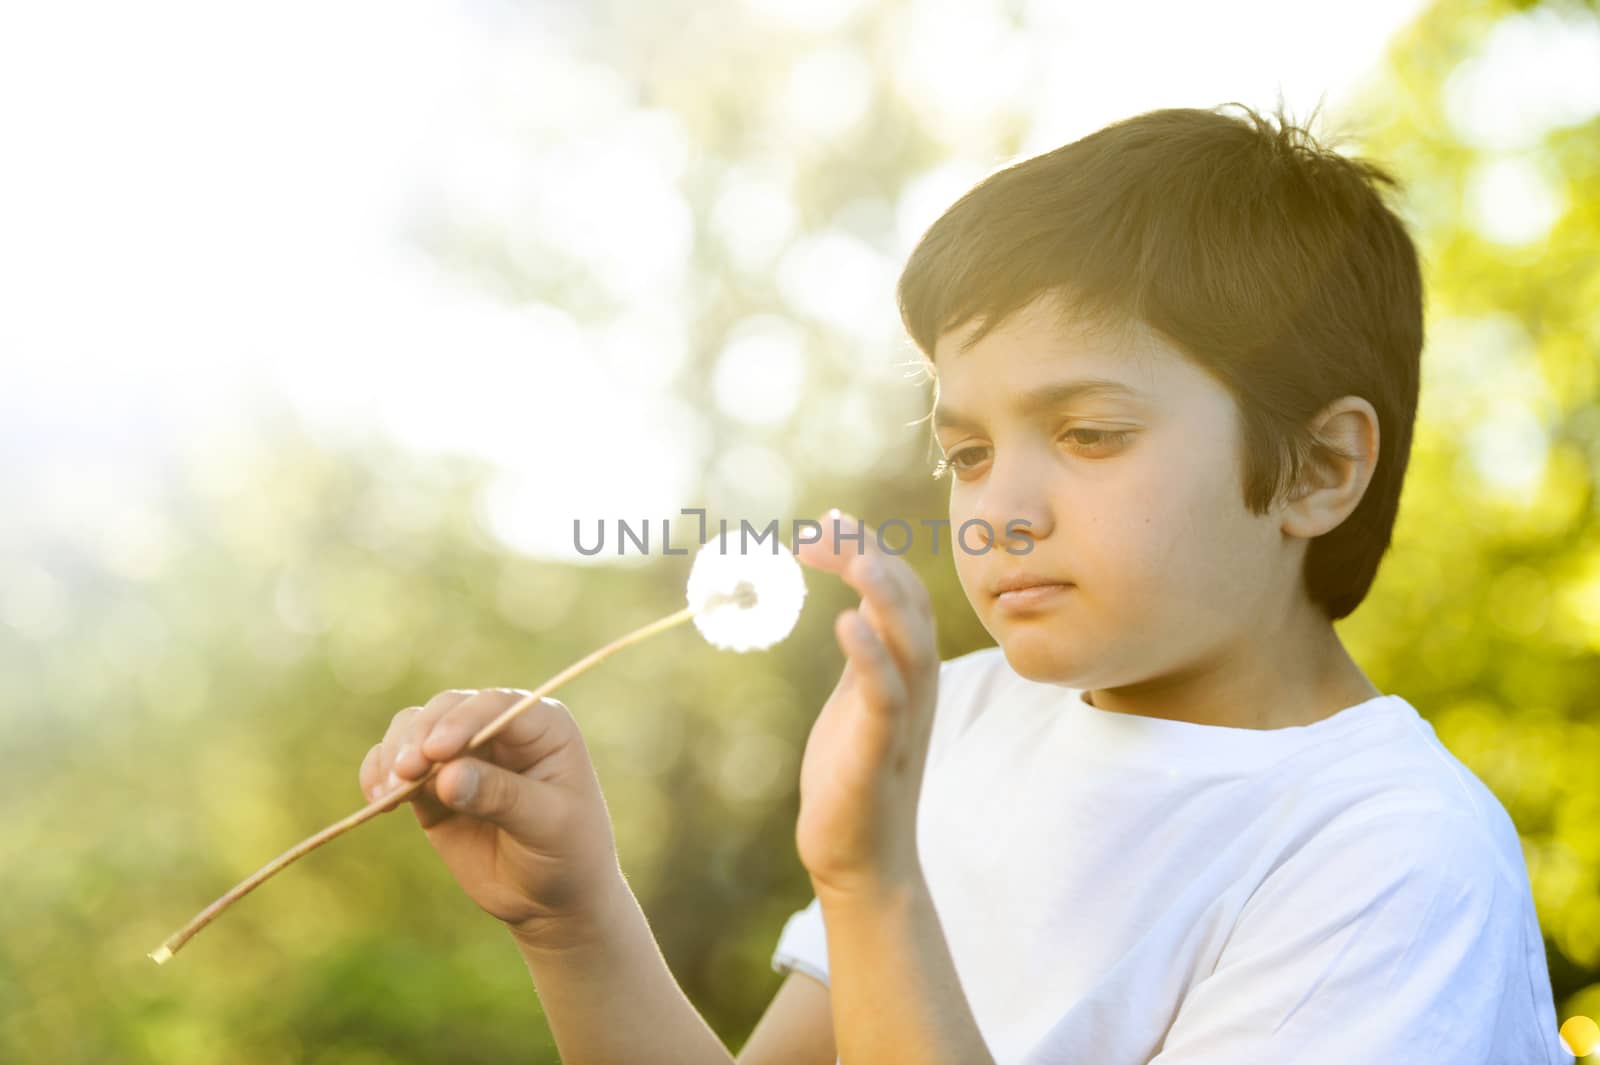 Wishes-Young boy blowing on a dandelion flower in spring